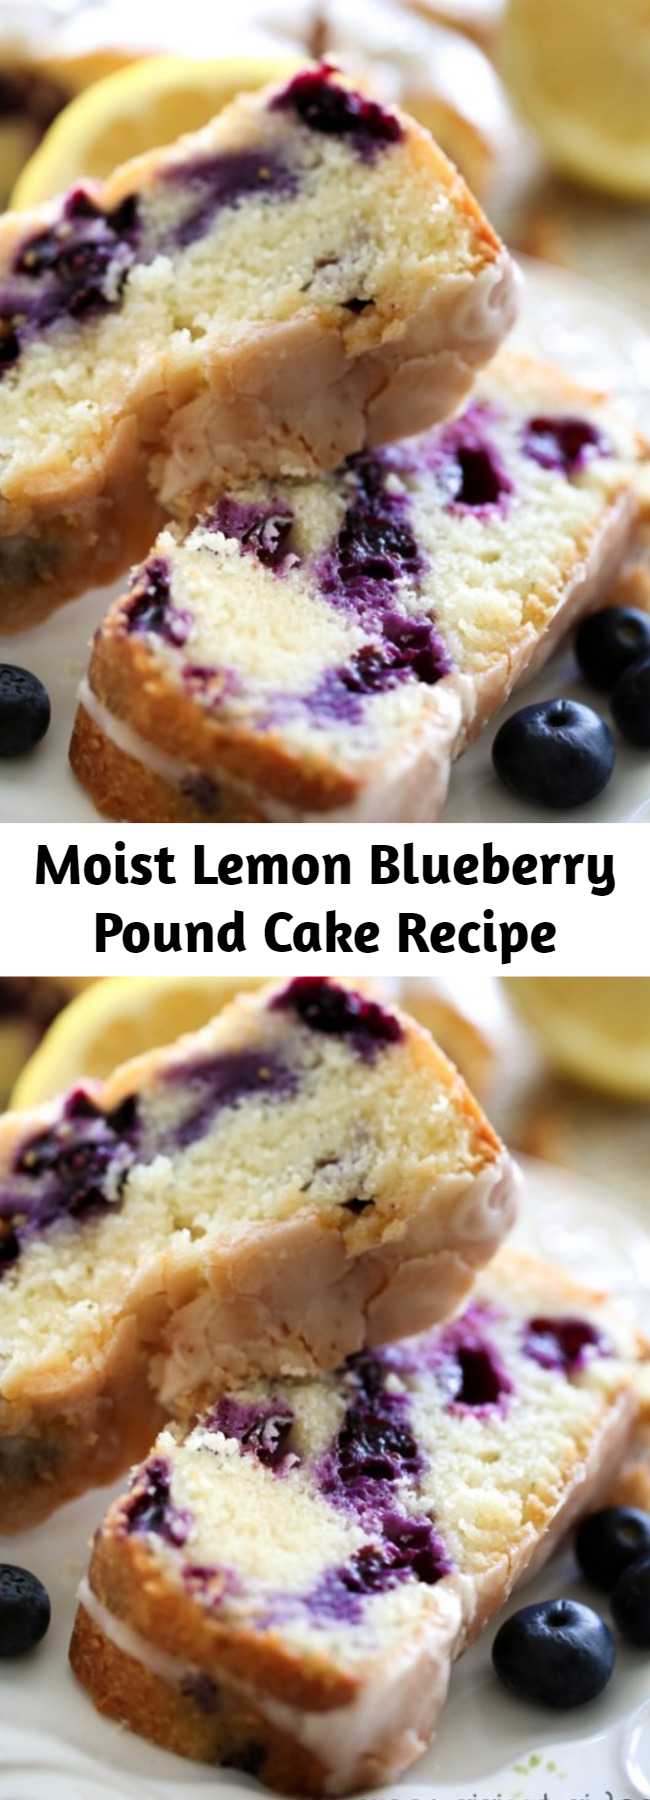 Moist Lemon Blueberry Pound Cake Recipe - A delicious and moist pound cake that is bursting with refreshing and amazing flavor!